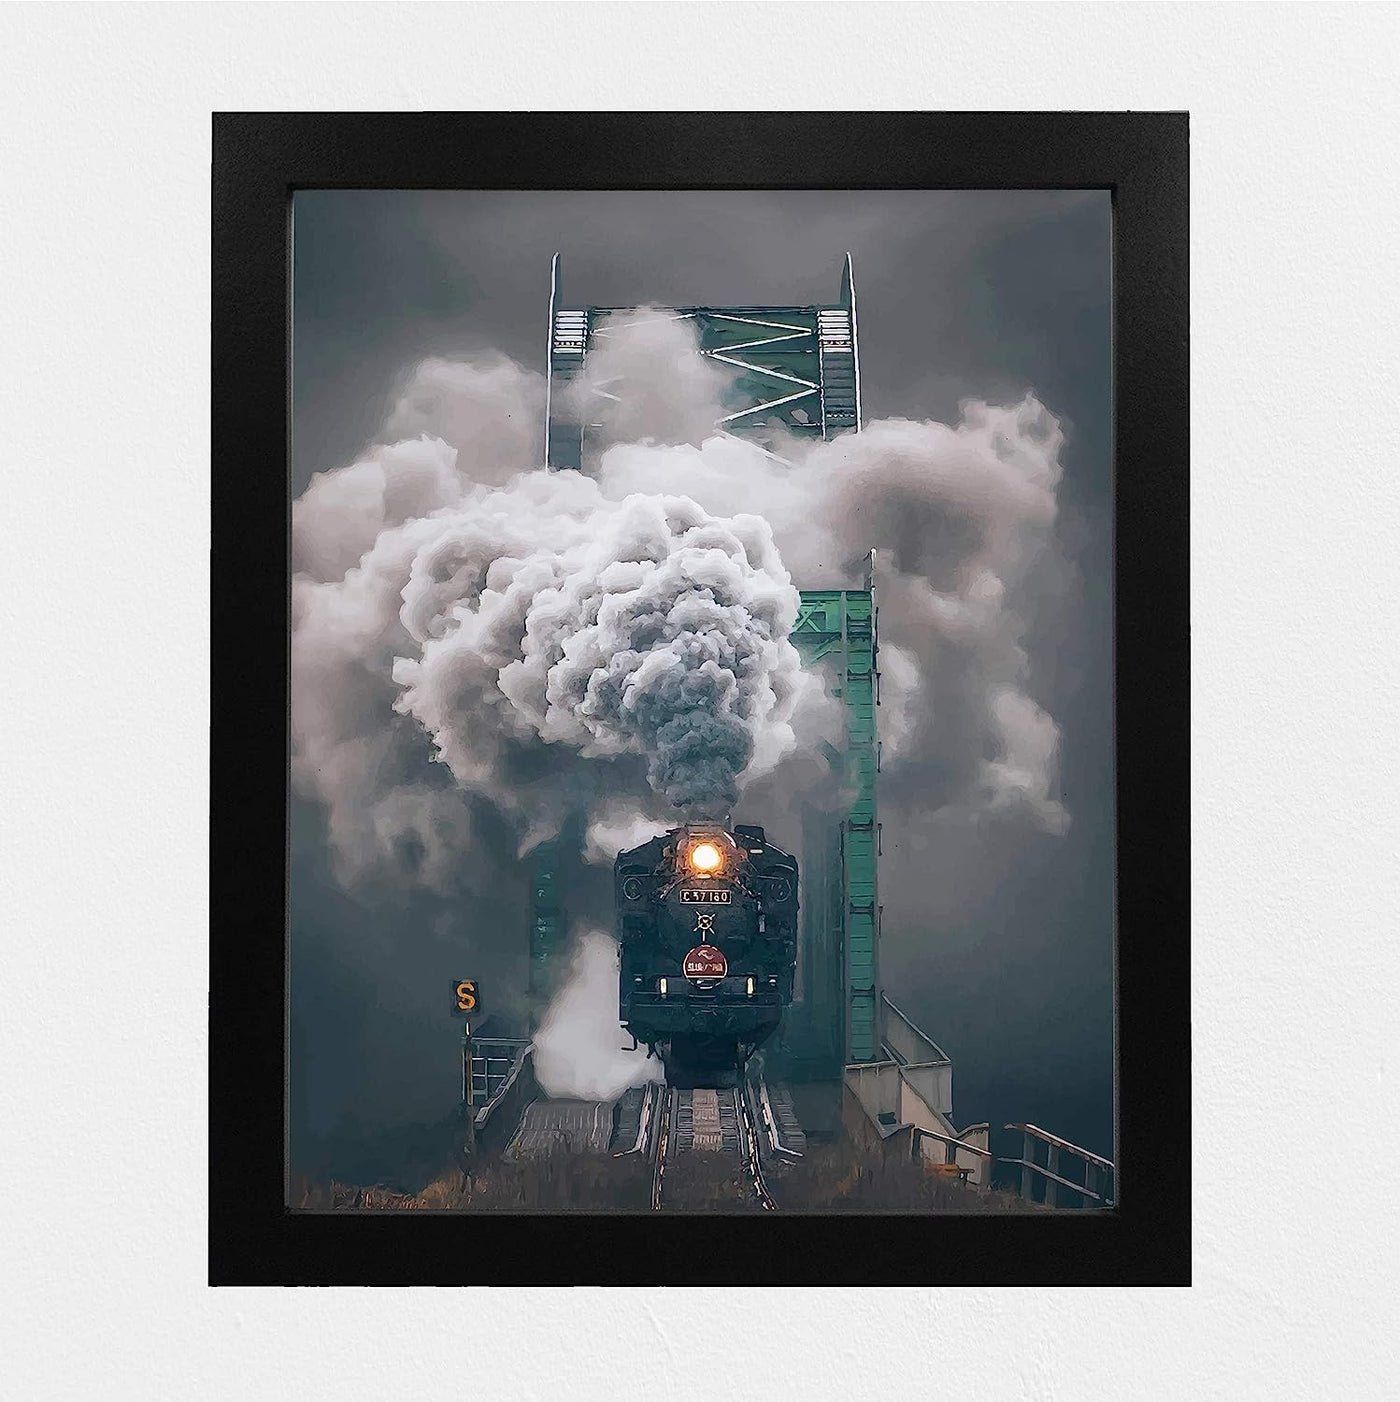 Antique Steam Locomotive Wall Decor Image -8x10" Retro Train Poster Print-Ready to Frame. Railroad Decor for Home-Kids Bedroom-Office-Studio. Perfect Decoration for Game Room-Garage-Man Cave!